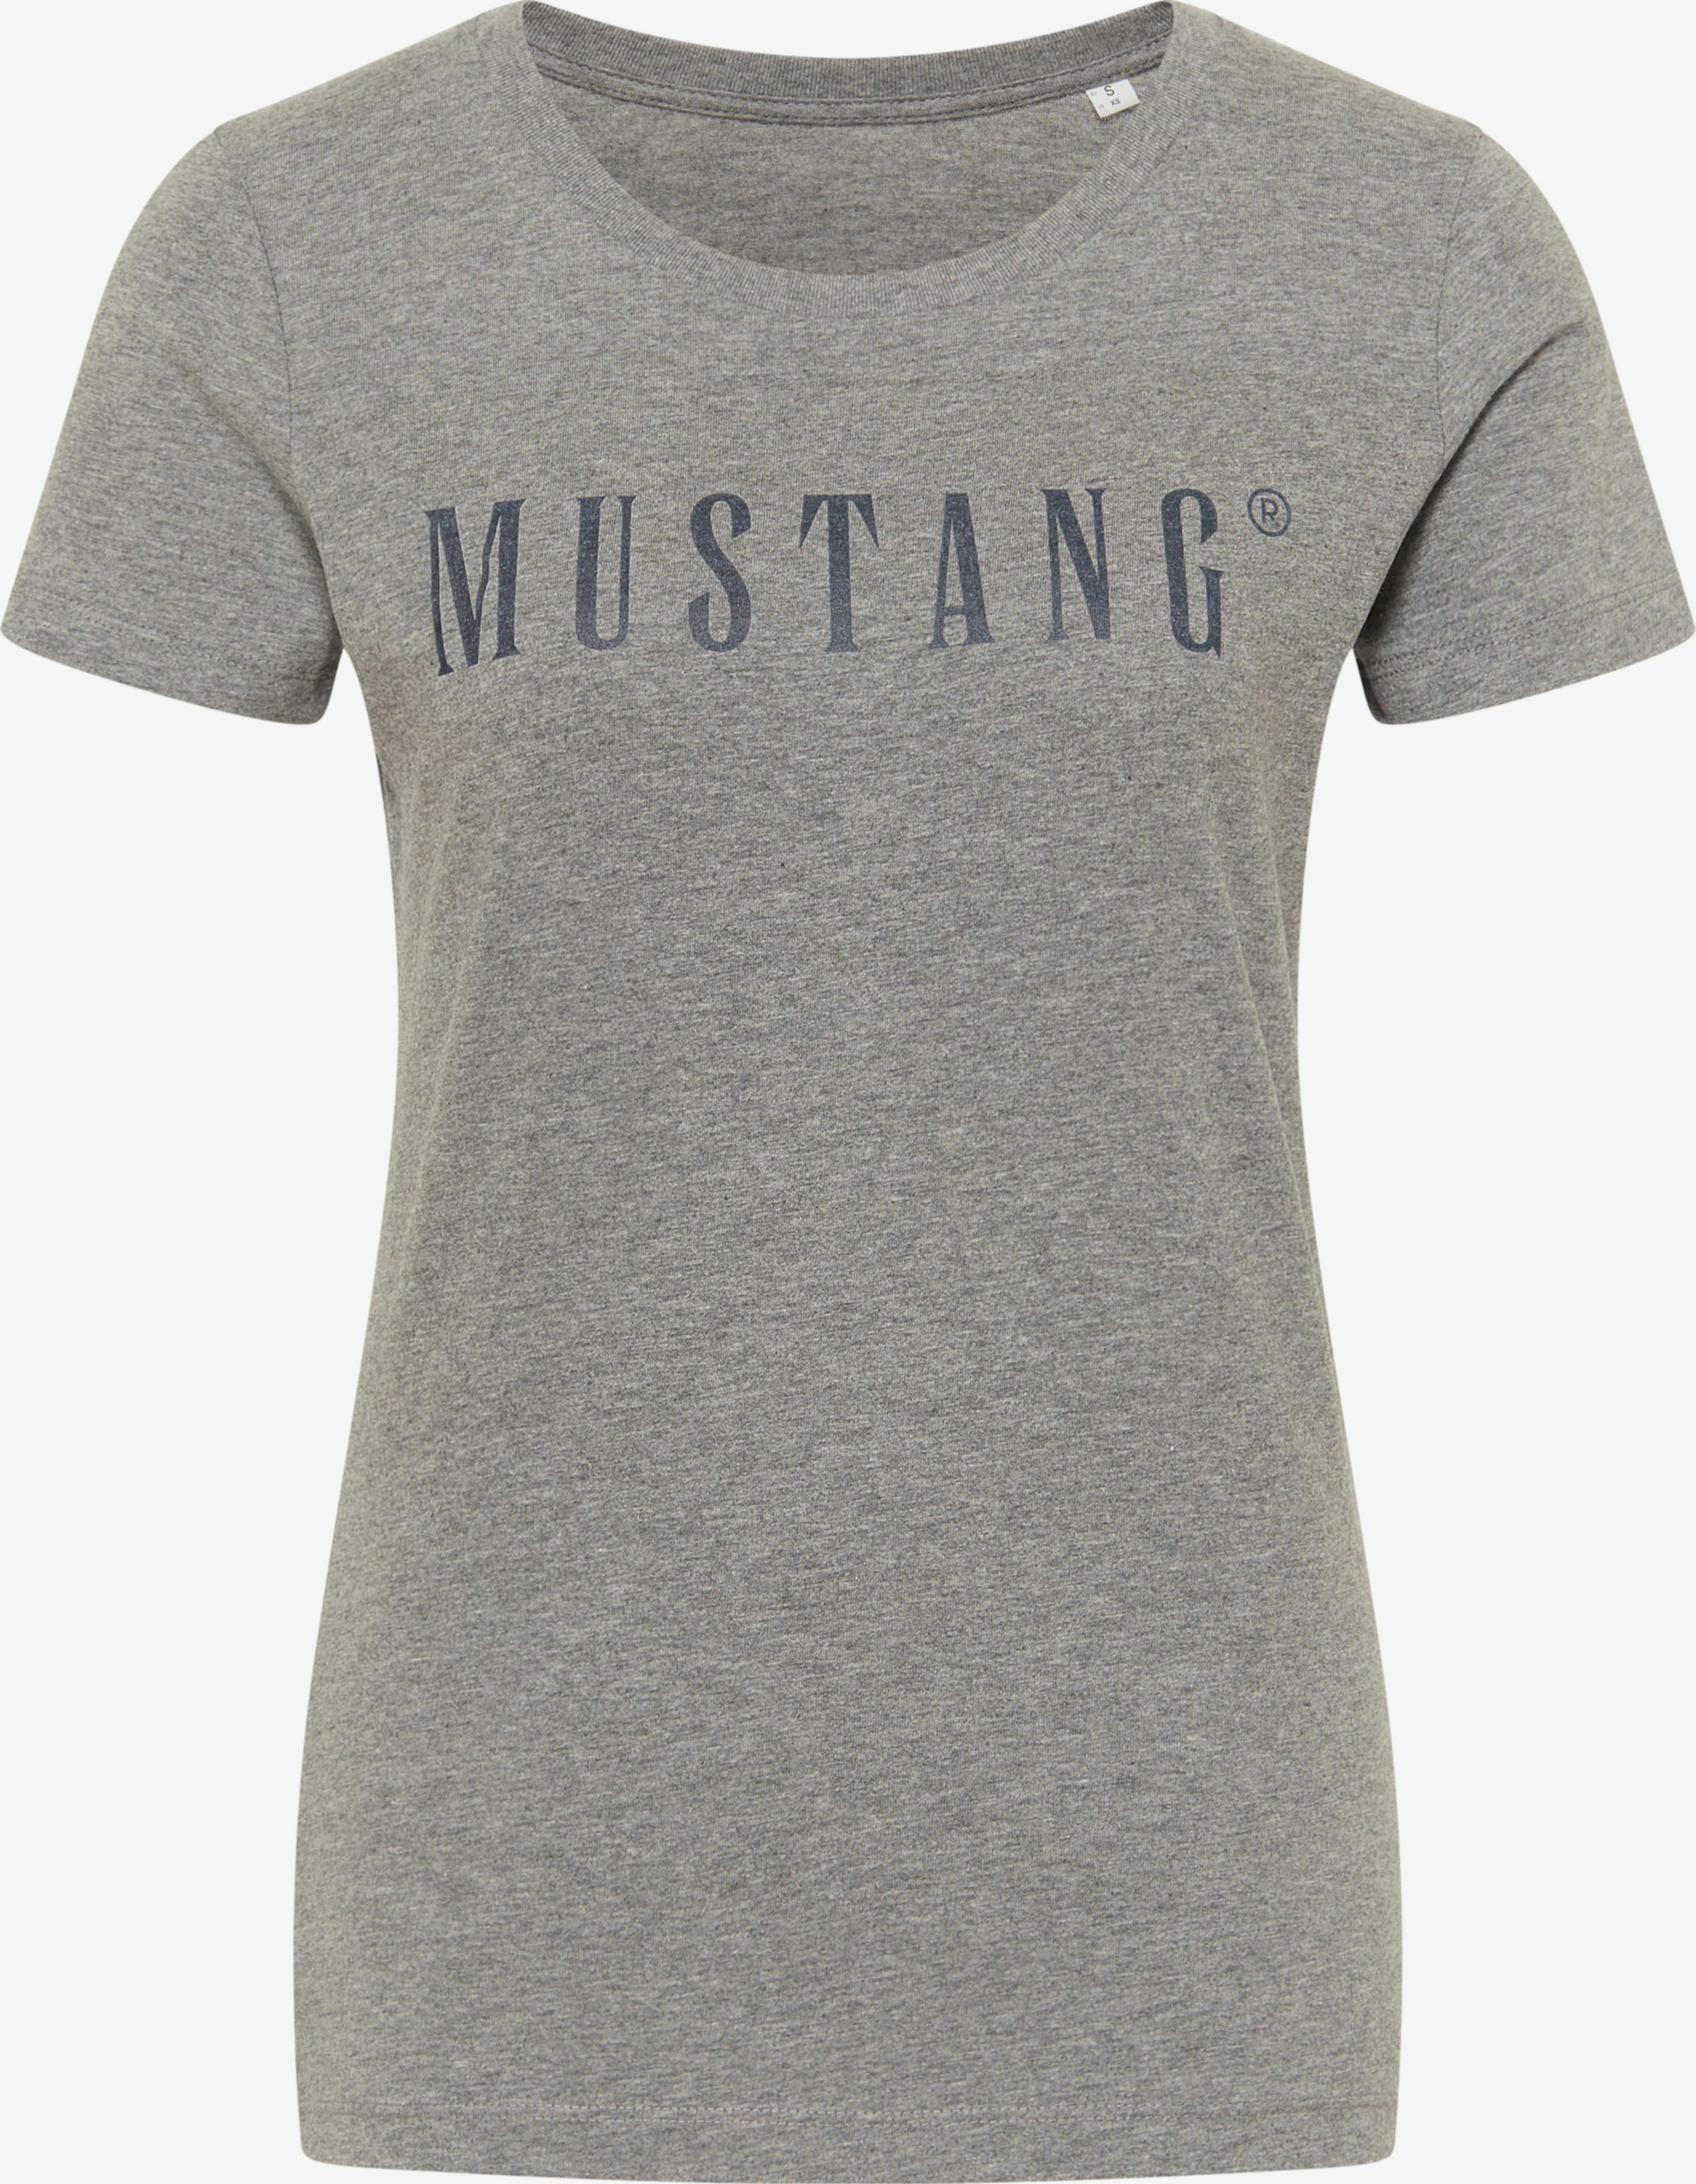 MUSTANG T-Shirt in Dunkelgrau, Graumeliert | ABOUT YOU | T-Shirts